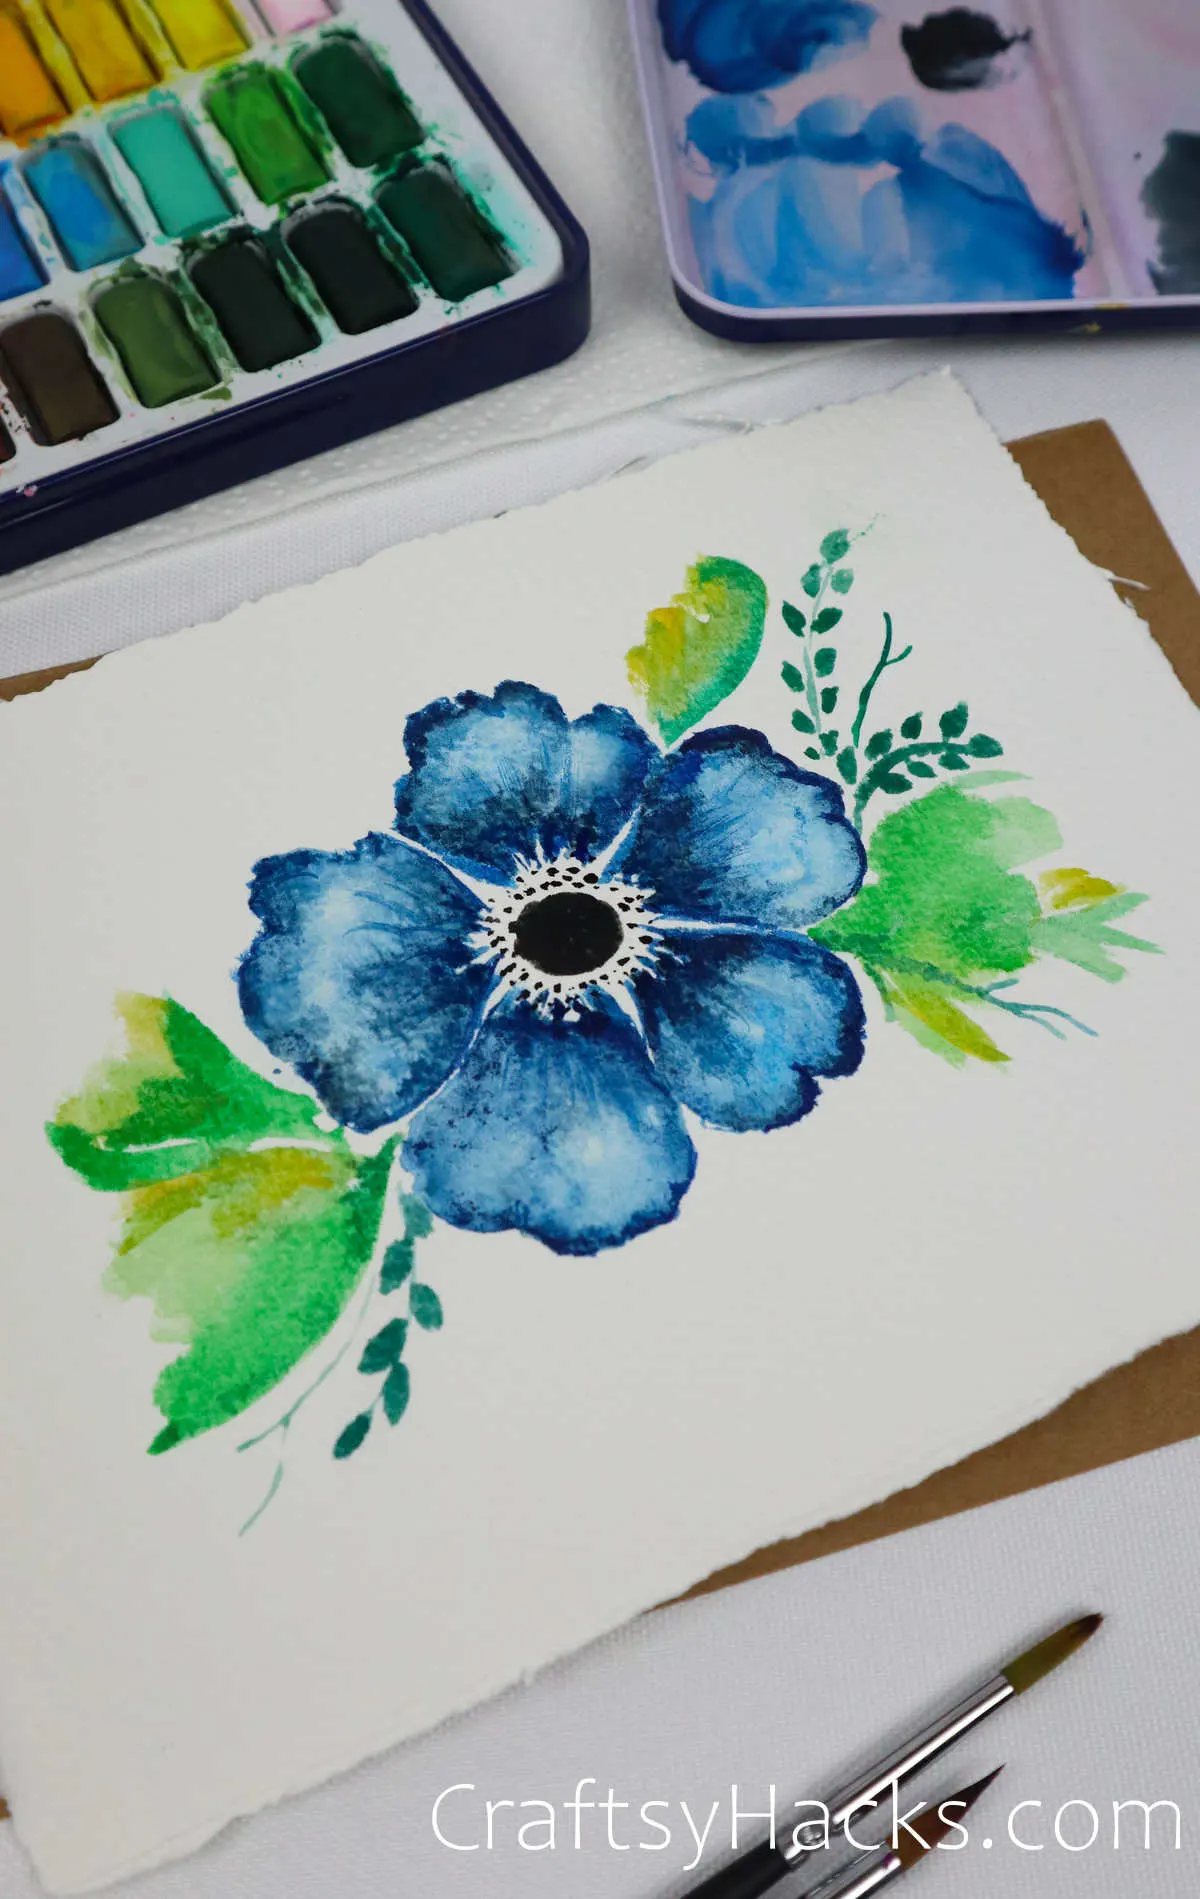 Some Flowers (watercolor) by putorius on DeviantArt